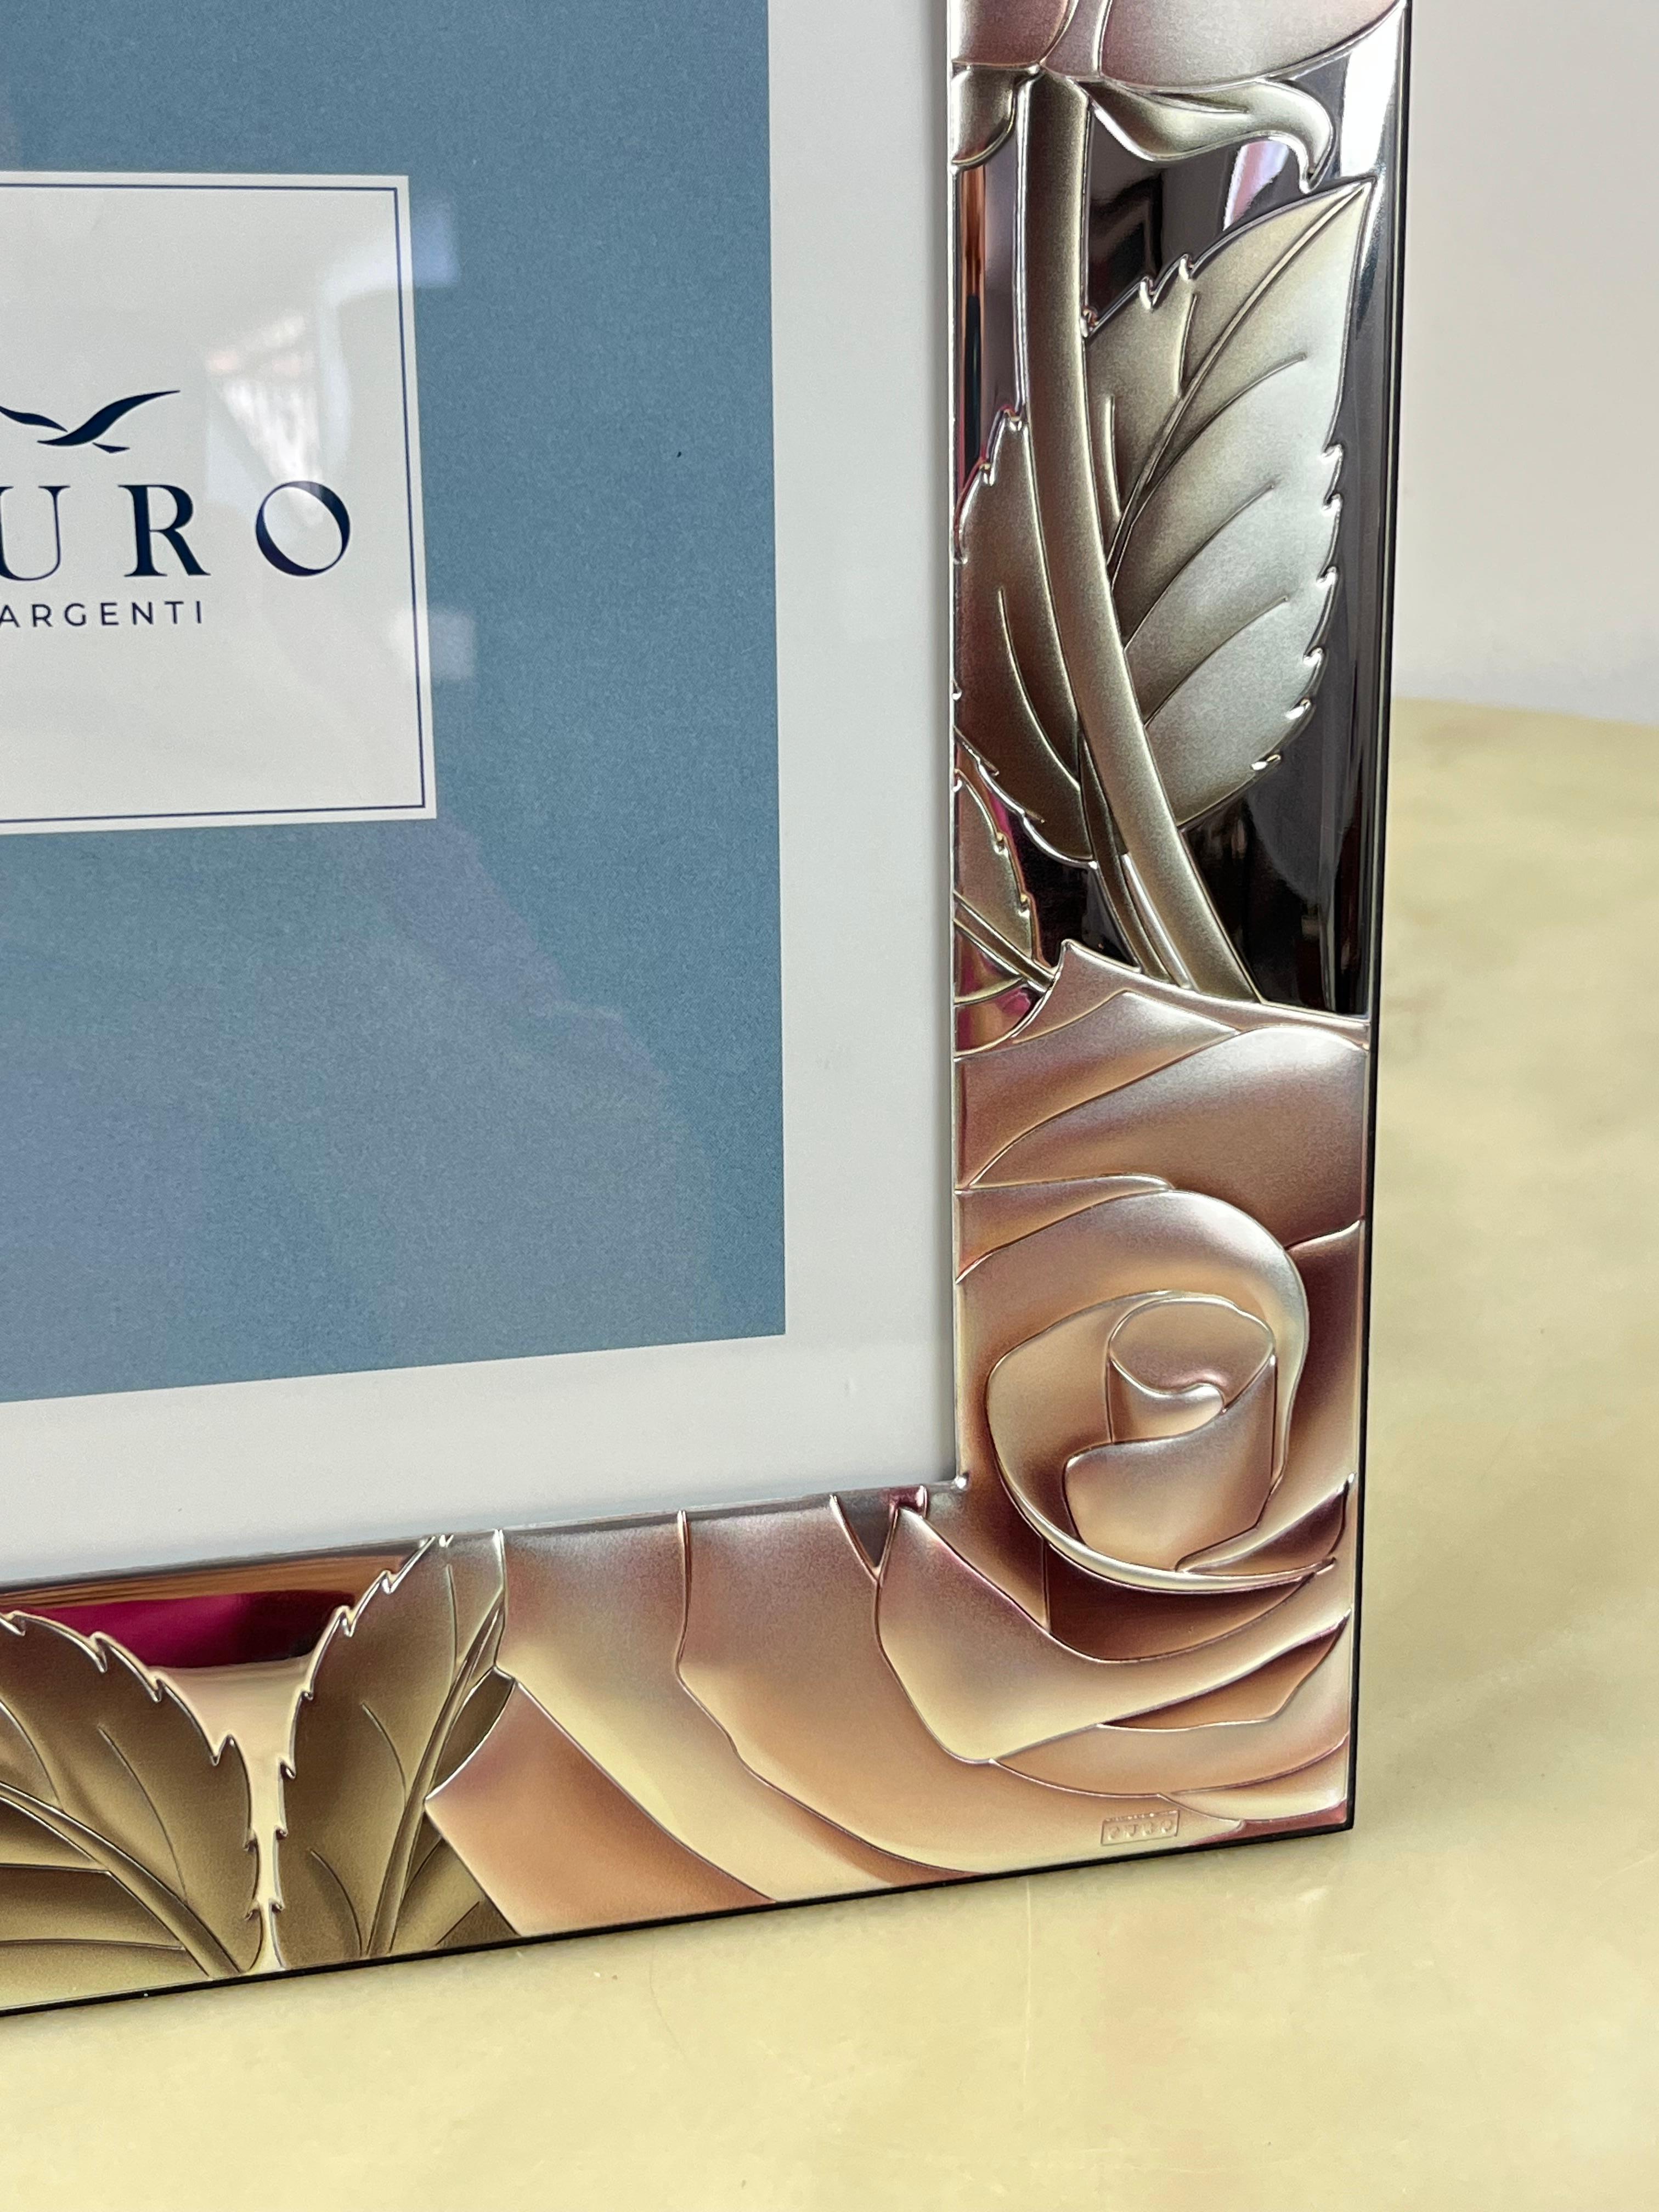 Photo frame in laminated enamelled silver made in Italy 20 x 25 cm.
New, including box.